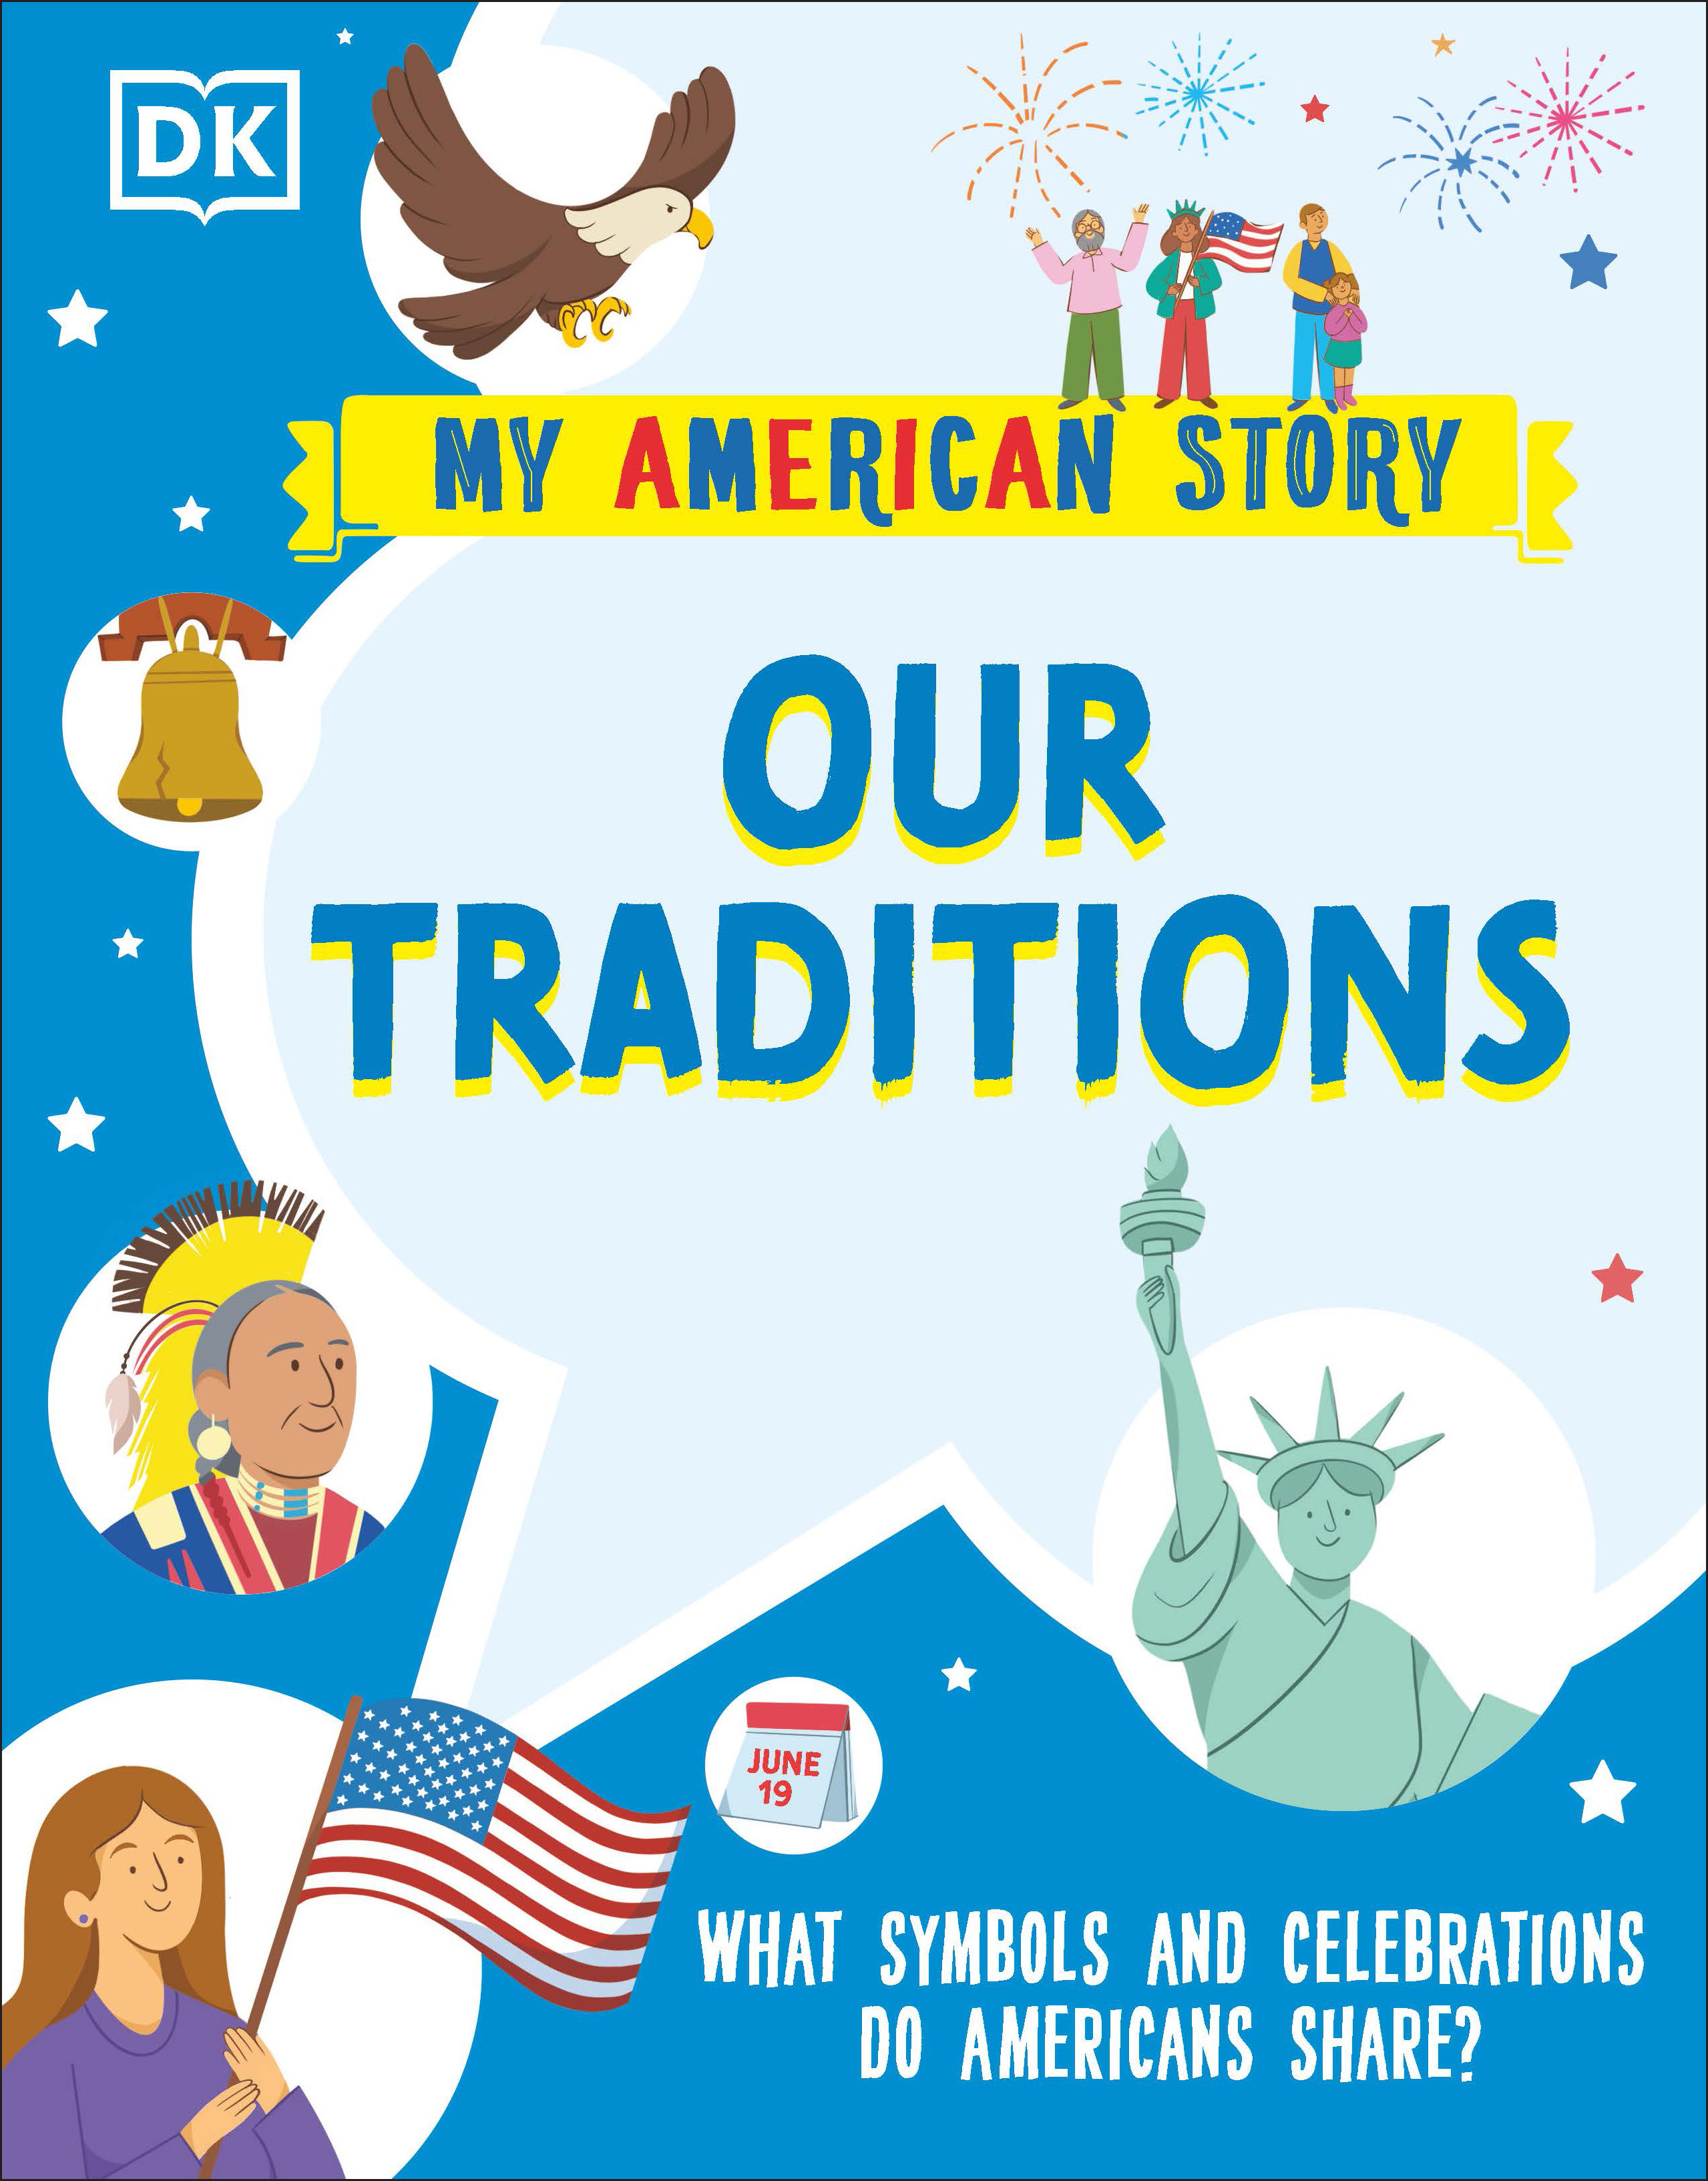 Our Traditions : What Symbols and Celebrations do Americans share? | 